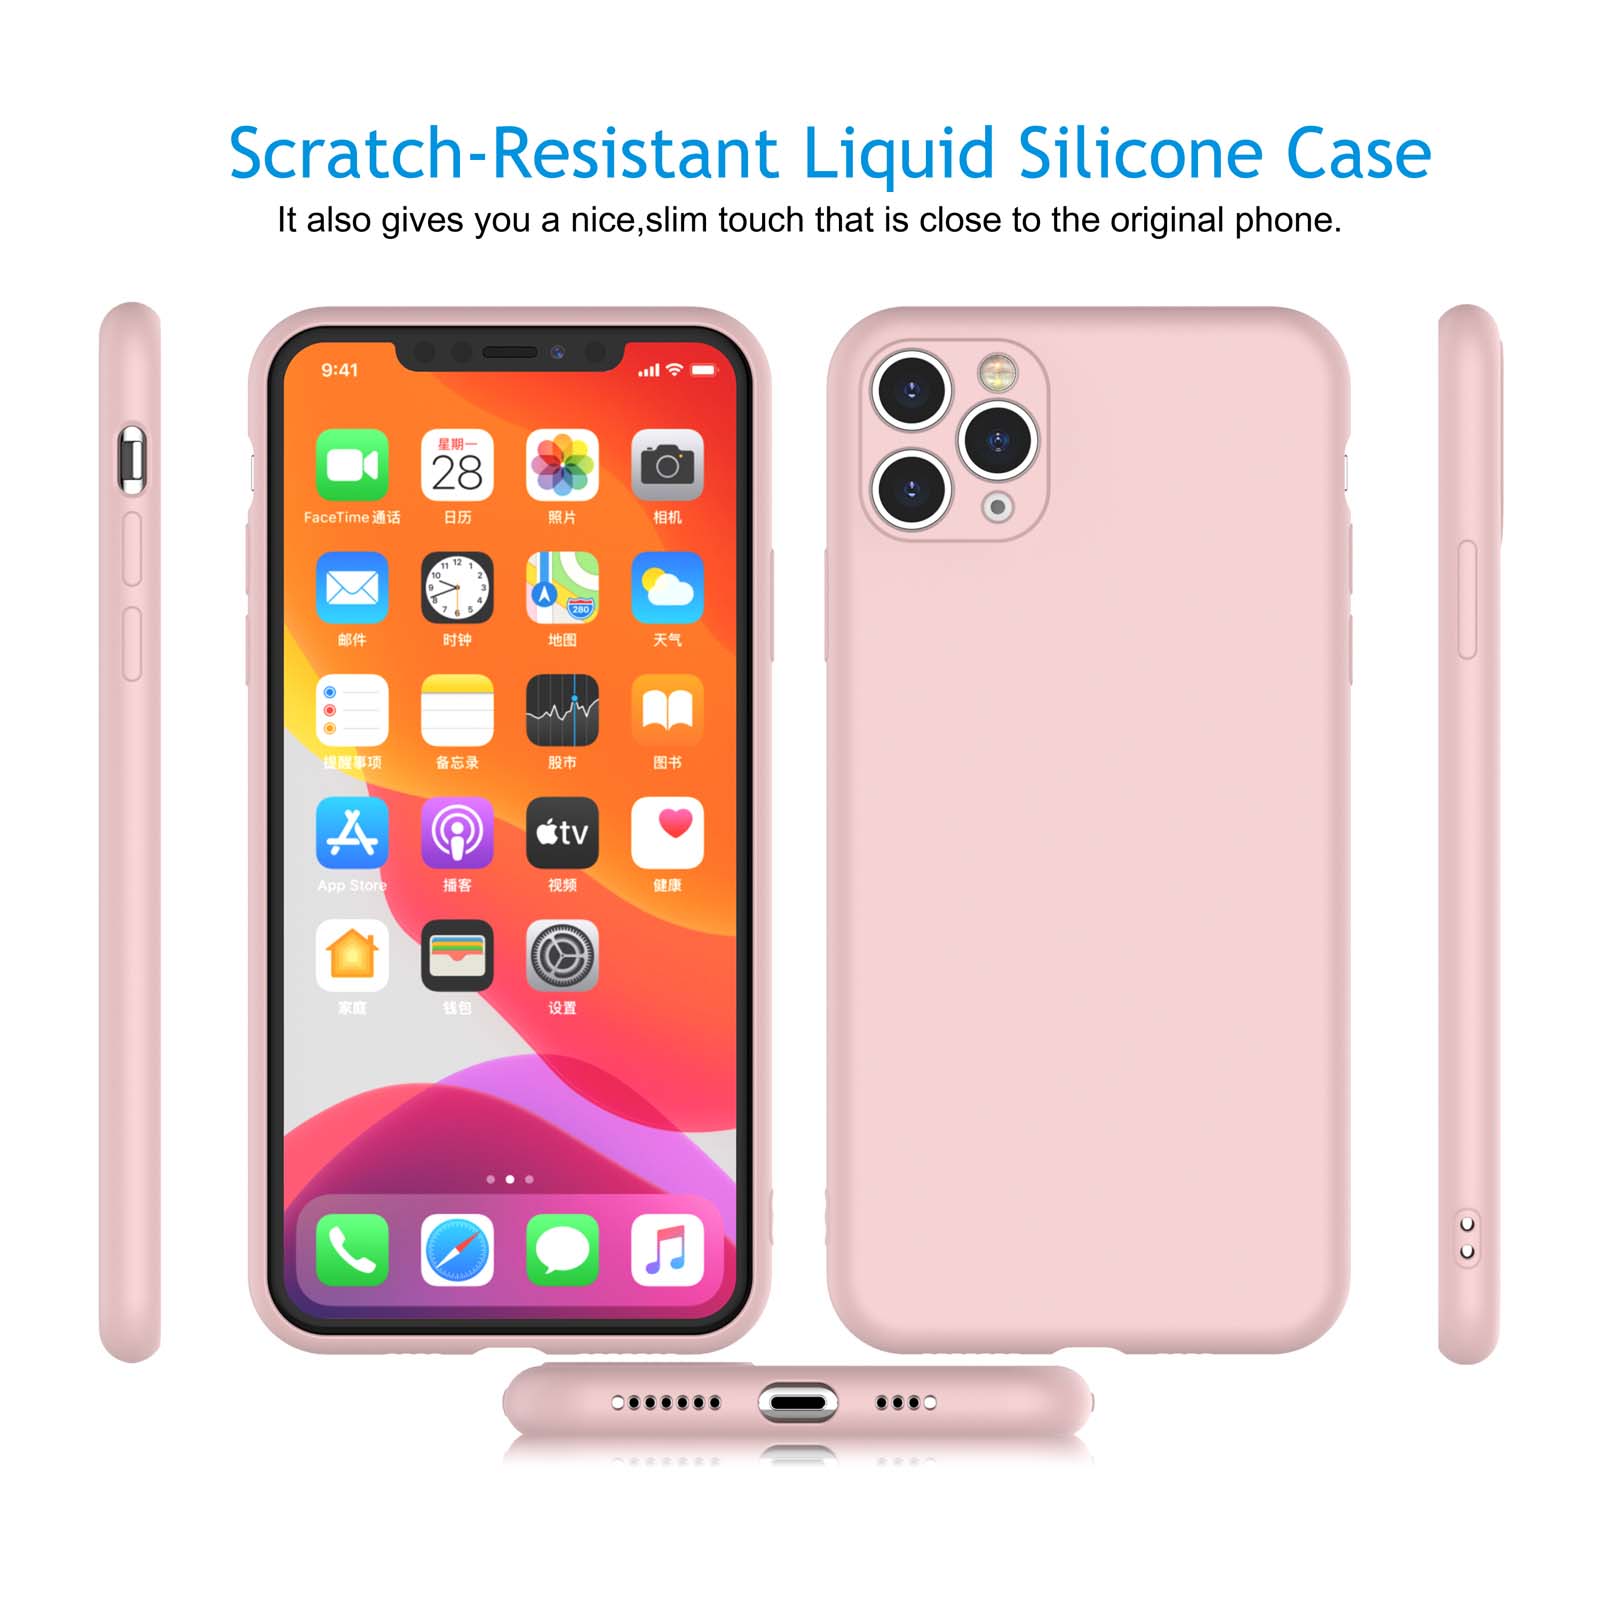 iPhone 11 Pro 5.8" Case, Slim Case for iPhone 11 Pro, Njjex Liquid Silicone Gel Rubber Shockproof Case Ultra Thin 11 Pro Case Slim Matte Surface Cover for Apple iPhone 11 Pro (2019) 5.8" -Pink - image 3 of 9